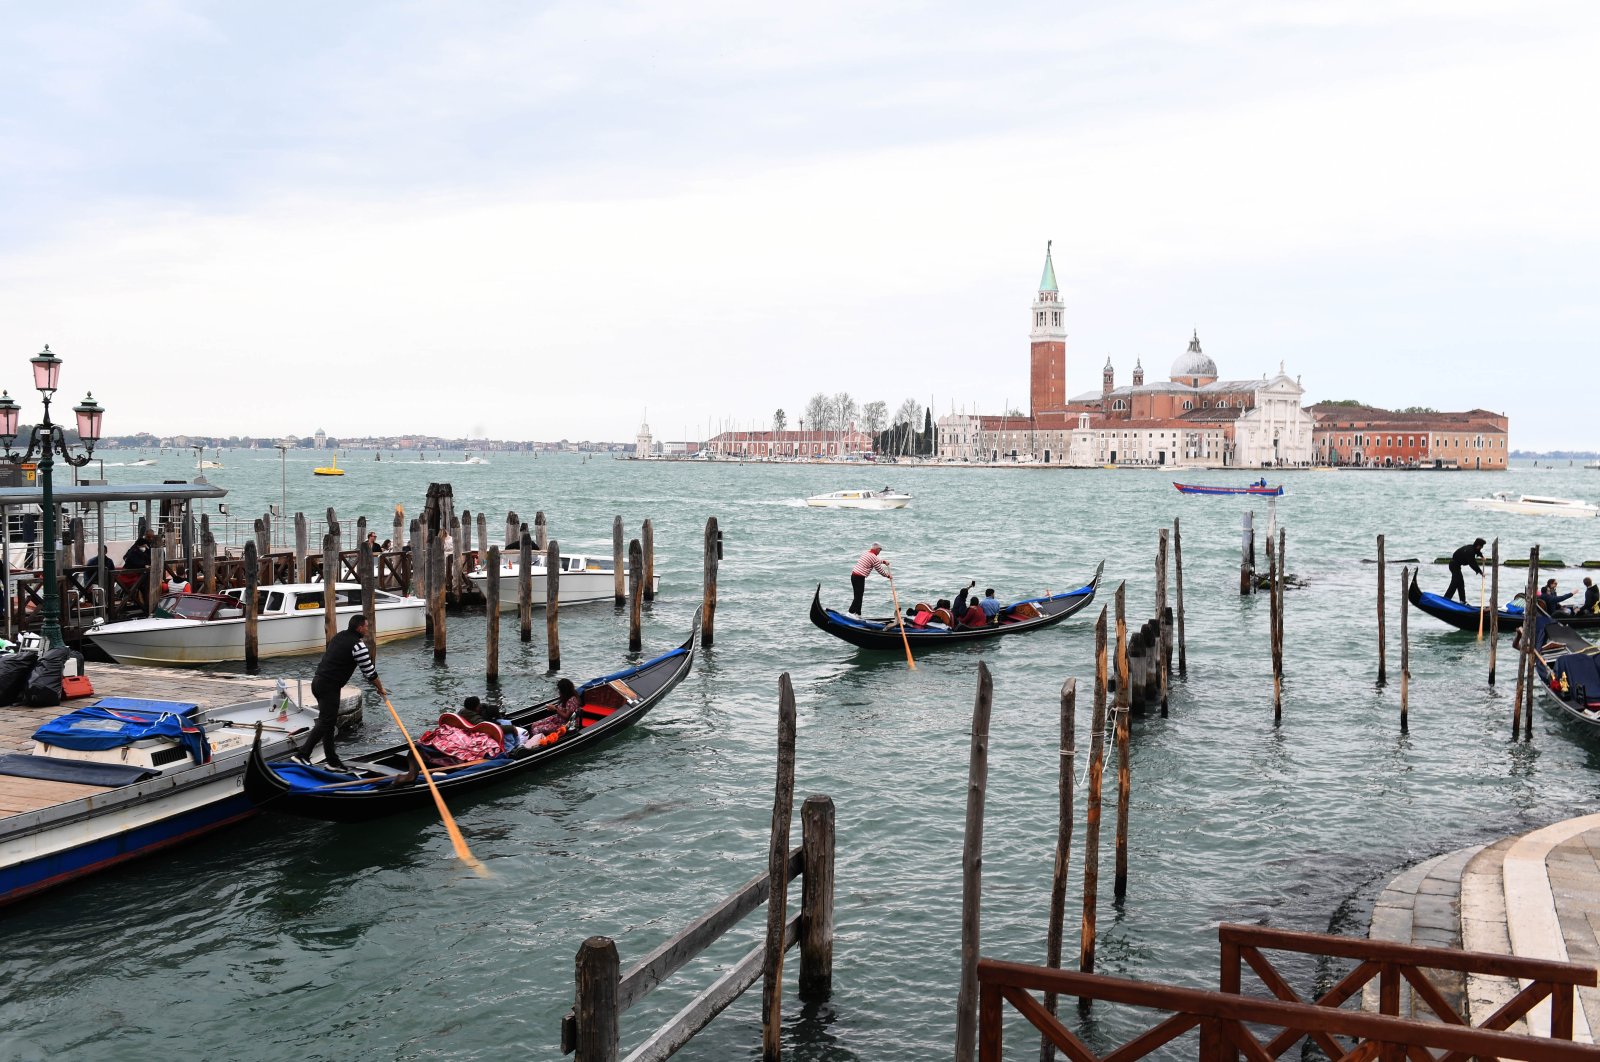 Tourists looking to explore the iconic Italian lagoon city of Venice will have to pay a £5 ($5.4) admissions fee on certain days in the future if they do not stay overnight, the municipal council decided on Tuesday. (dpa Photo)